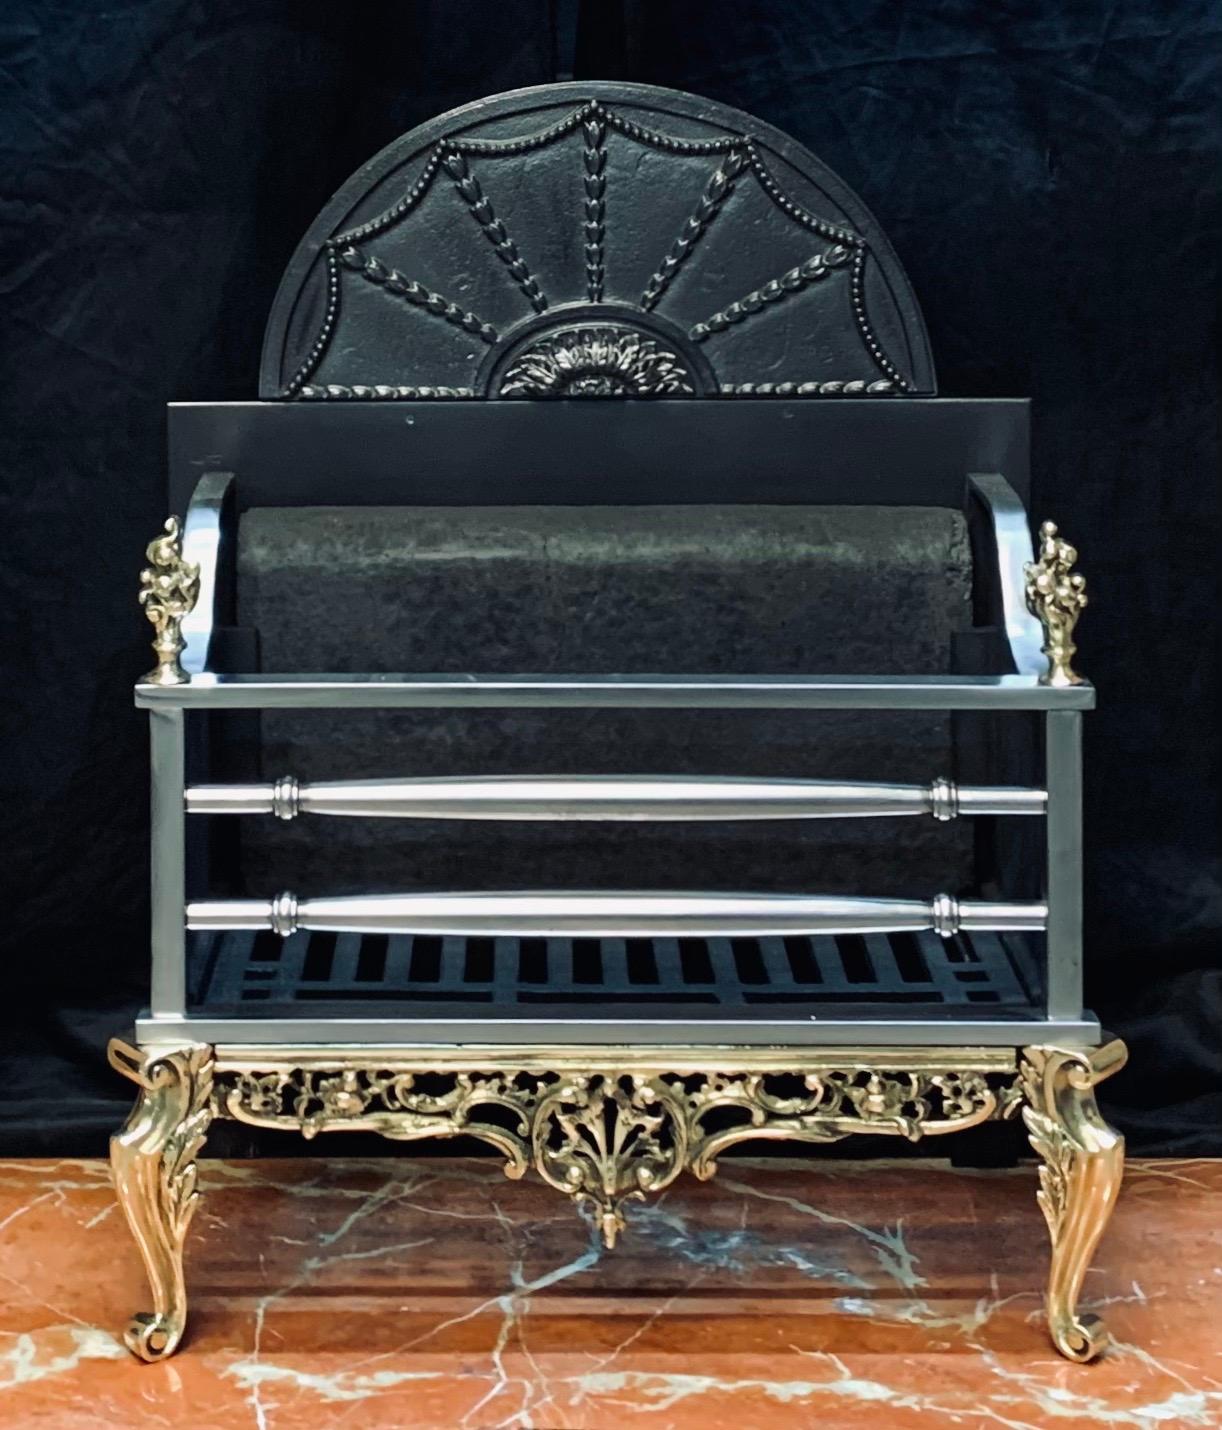 A charming 19th century Georgian style fire grate basket in polished brass and cast iron. A high cast decorated arched back plate, with its original fire stone, scalloped side cheeks surmounted with brass flame finials, below a pair of polished